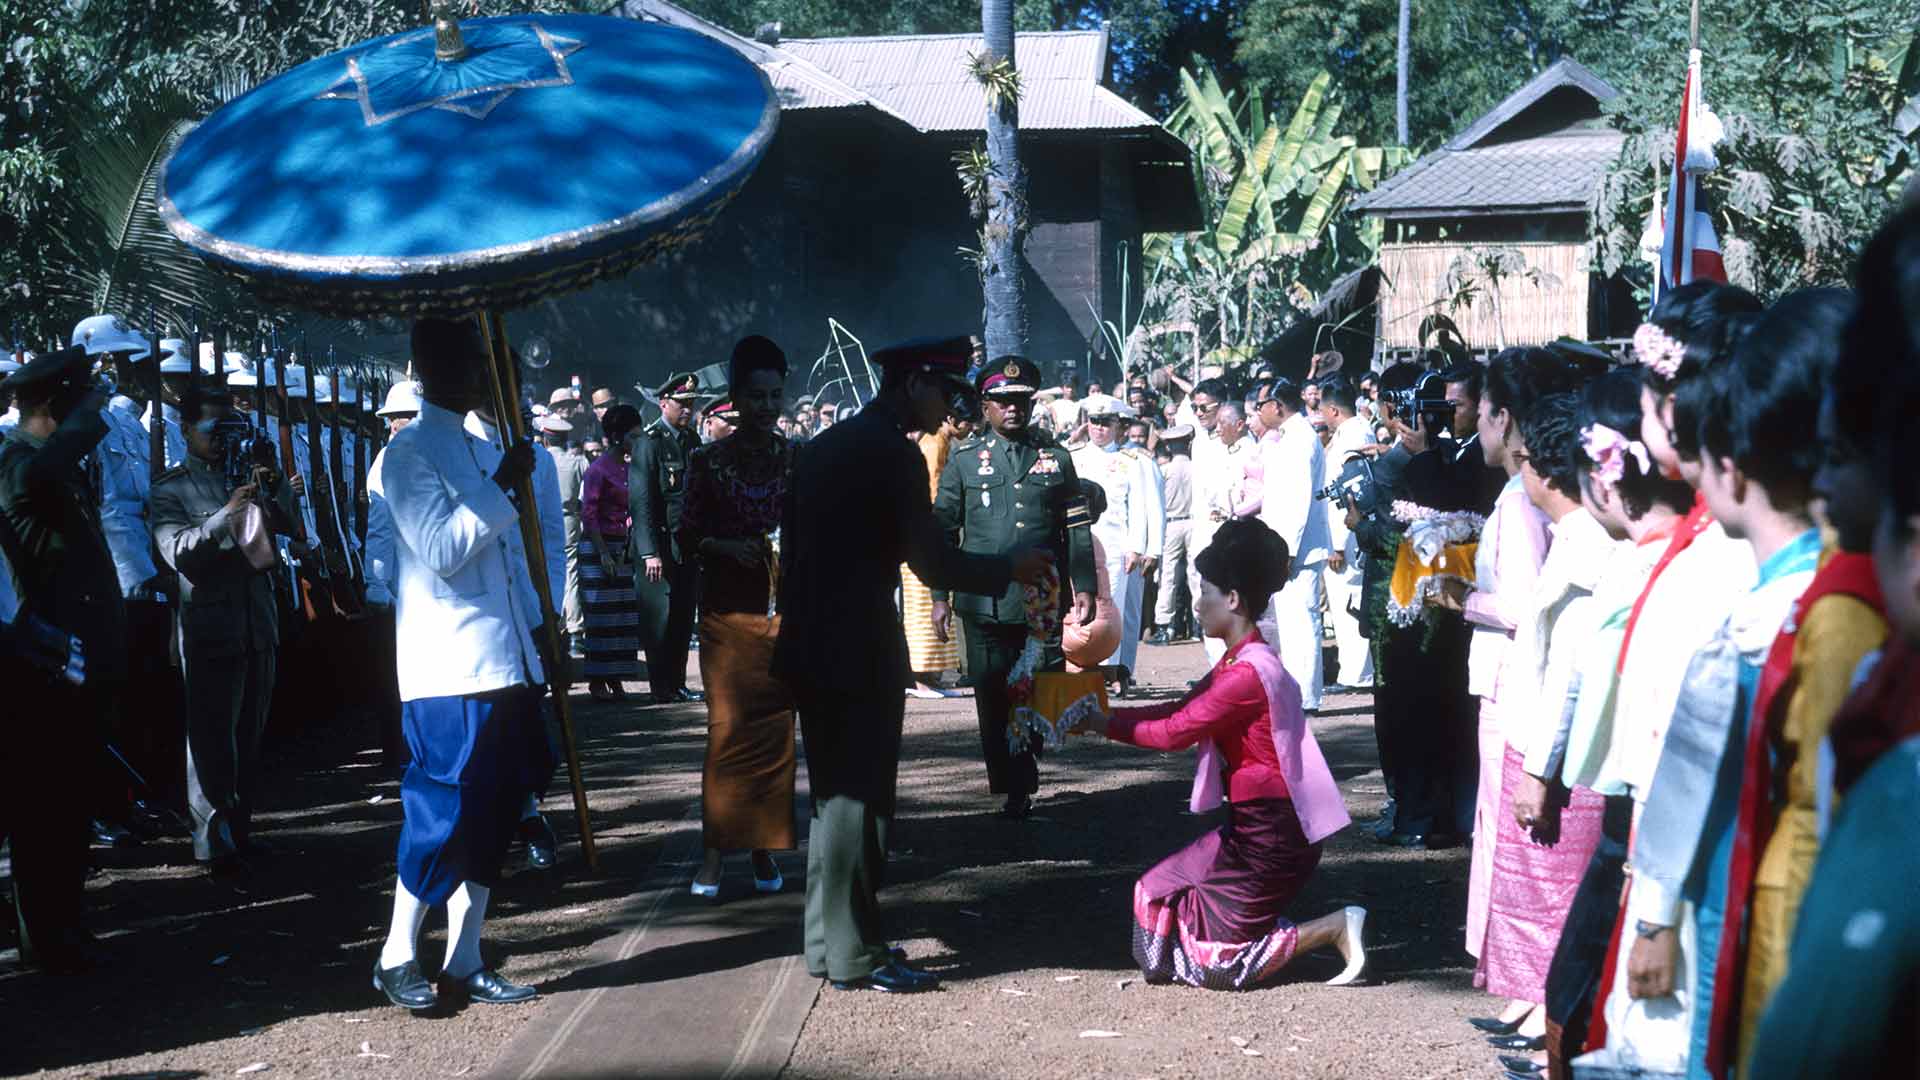 A young woman kneels to present a gift to a man in a military uniform.